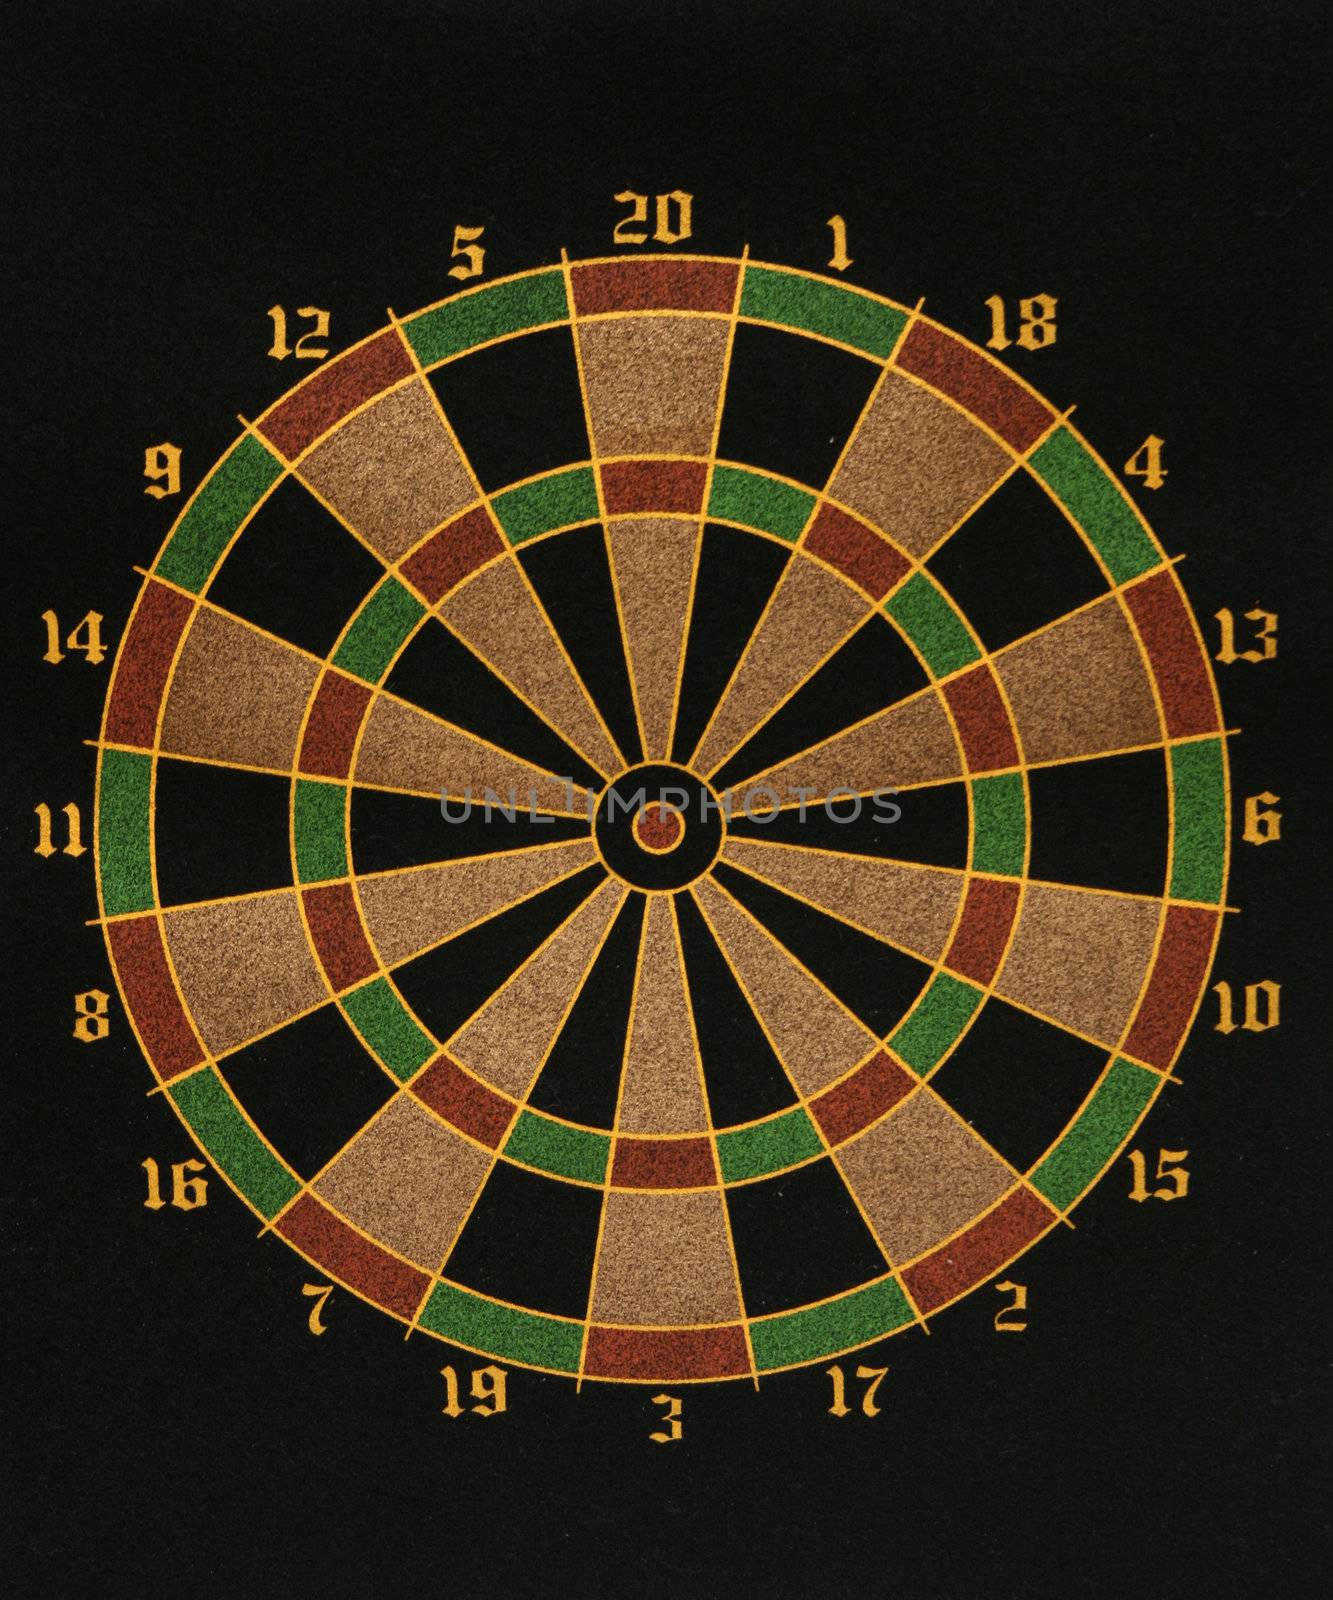 darts board game ready for use